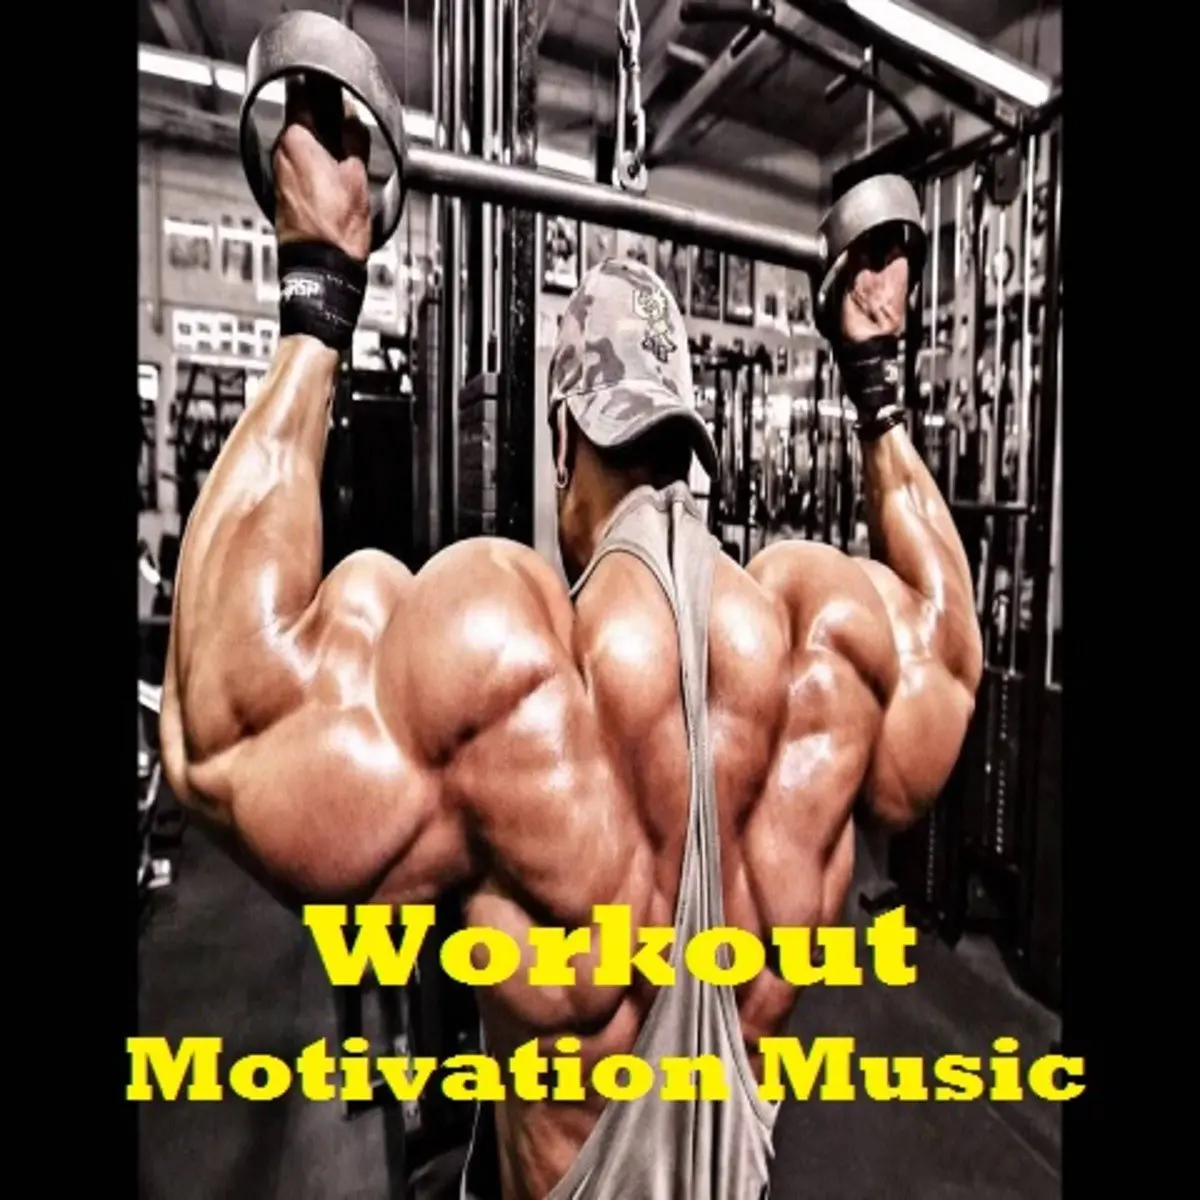 Workout Motivation Music Mp3 Song Download Workout